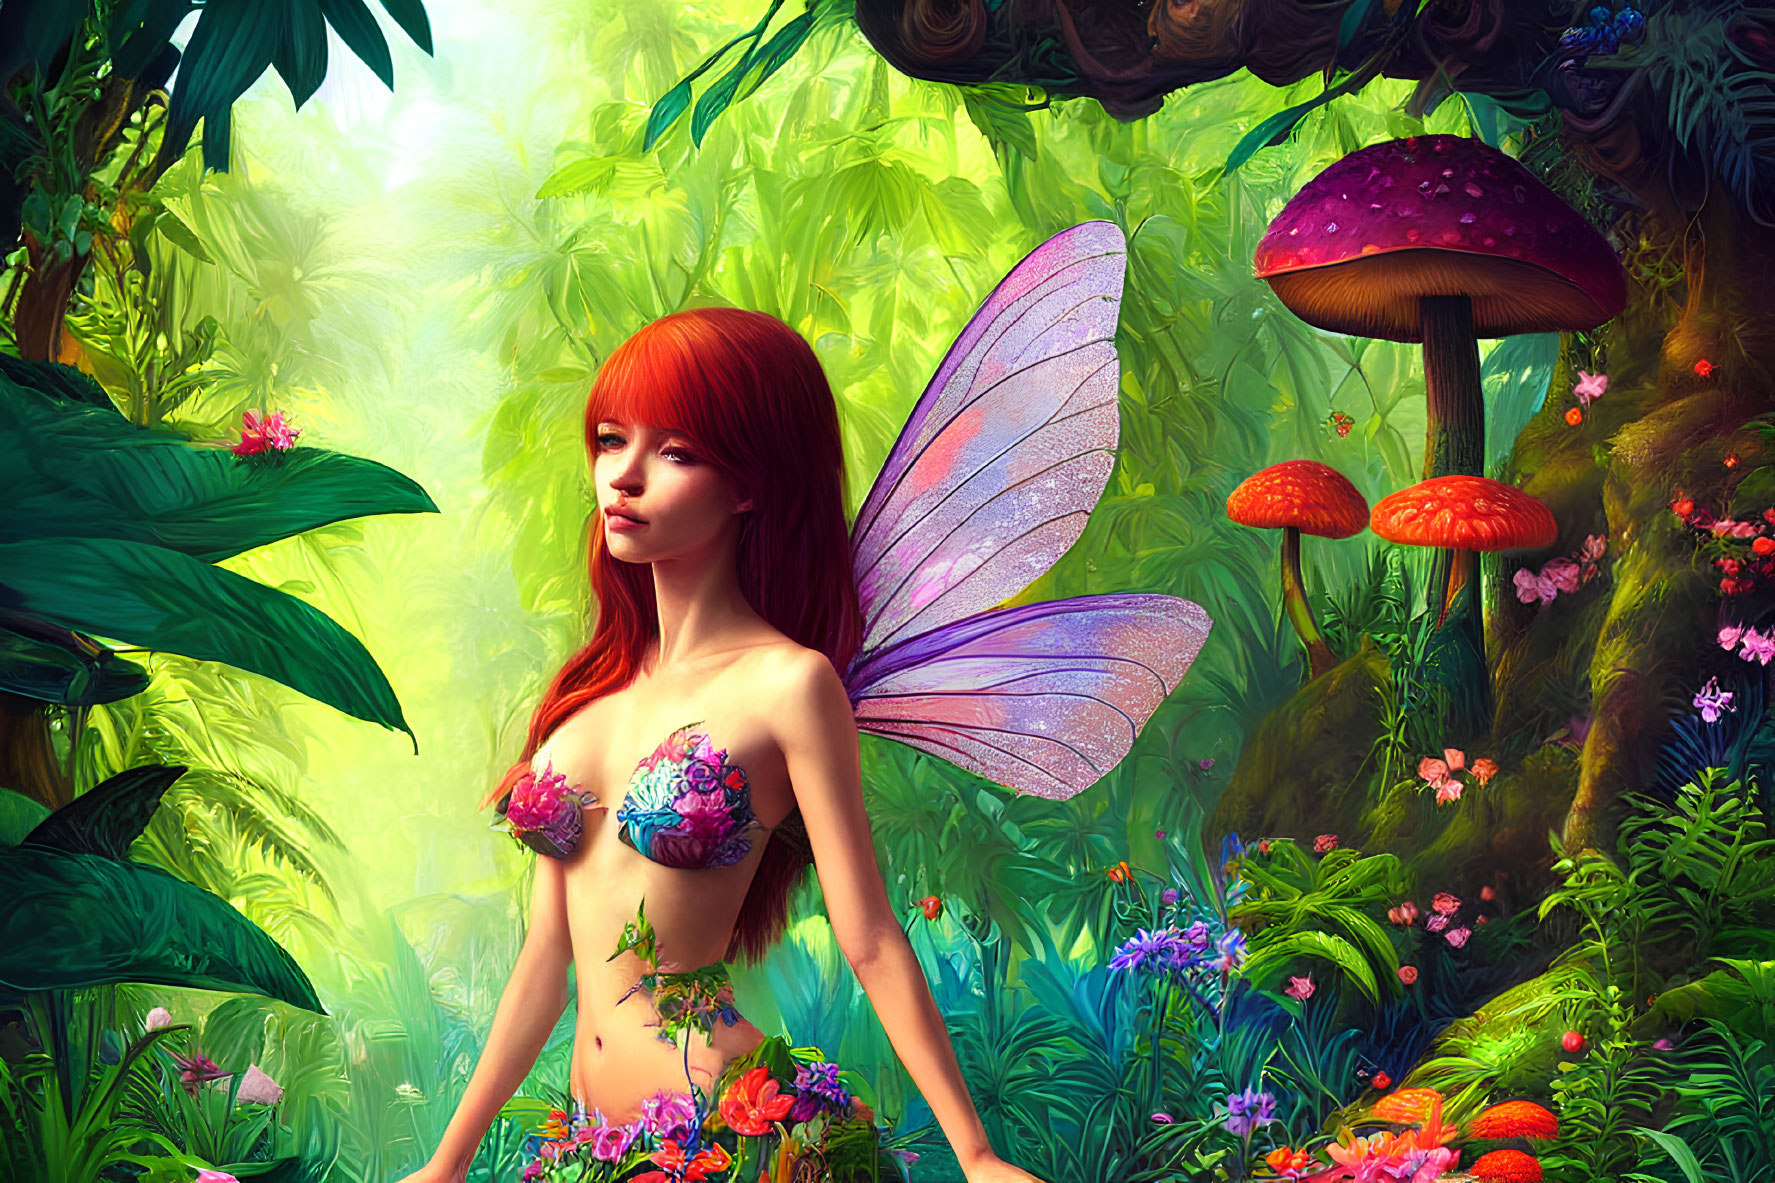 Red-haired fairy with translucent wings in lush, colorful forest